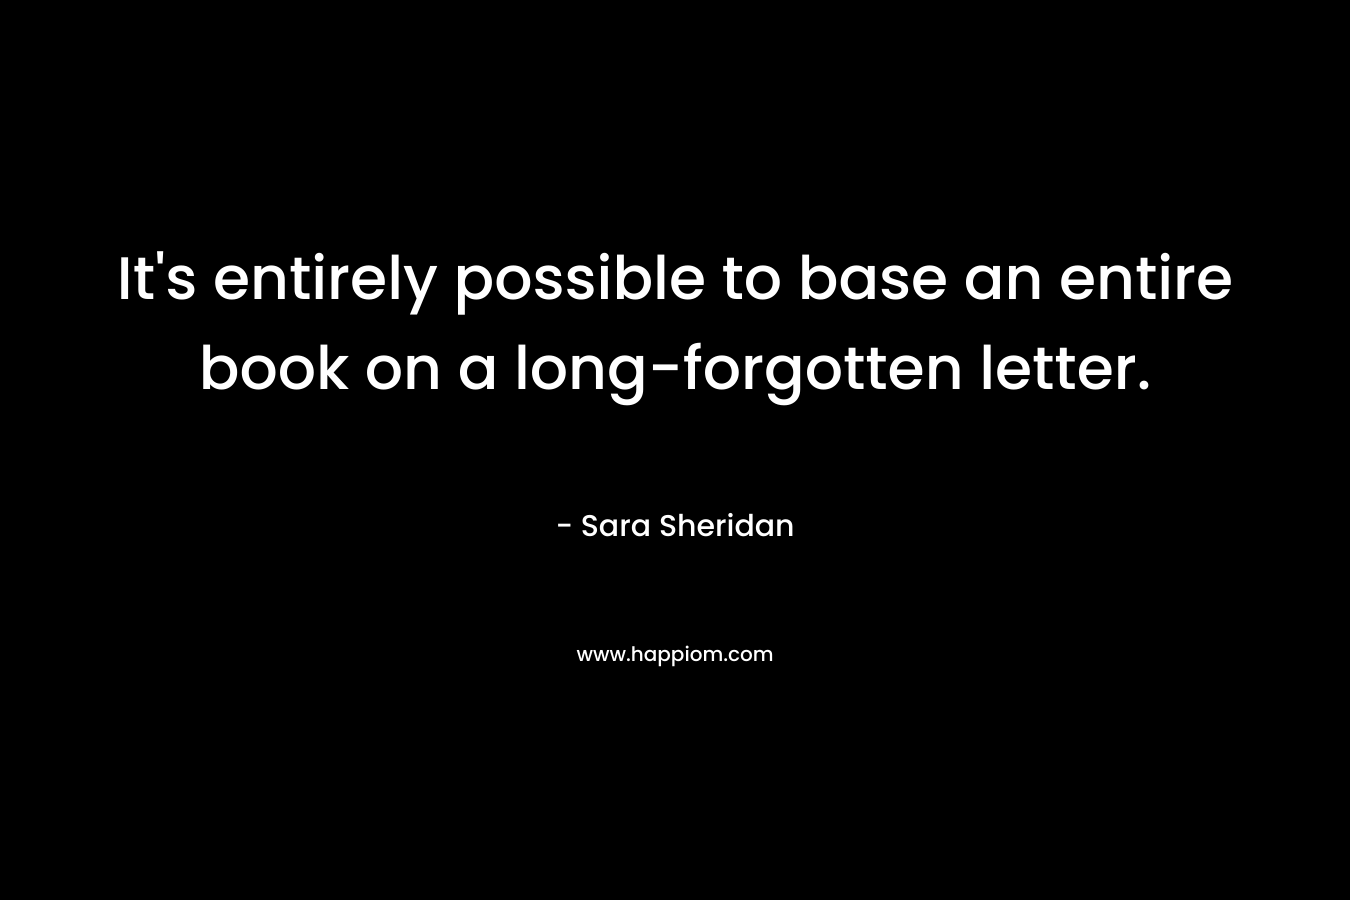 It’s entirely possible to base an entire book on a long-forgotten letter. – Sara Sheridan